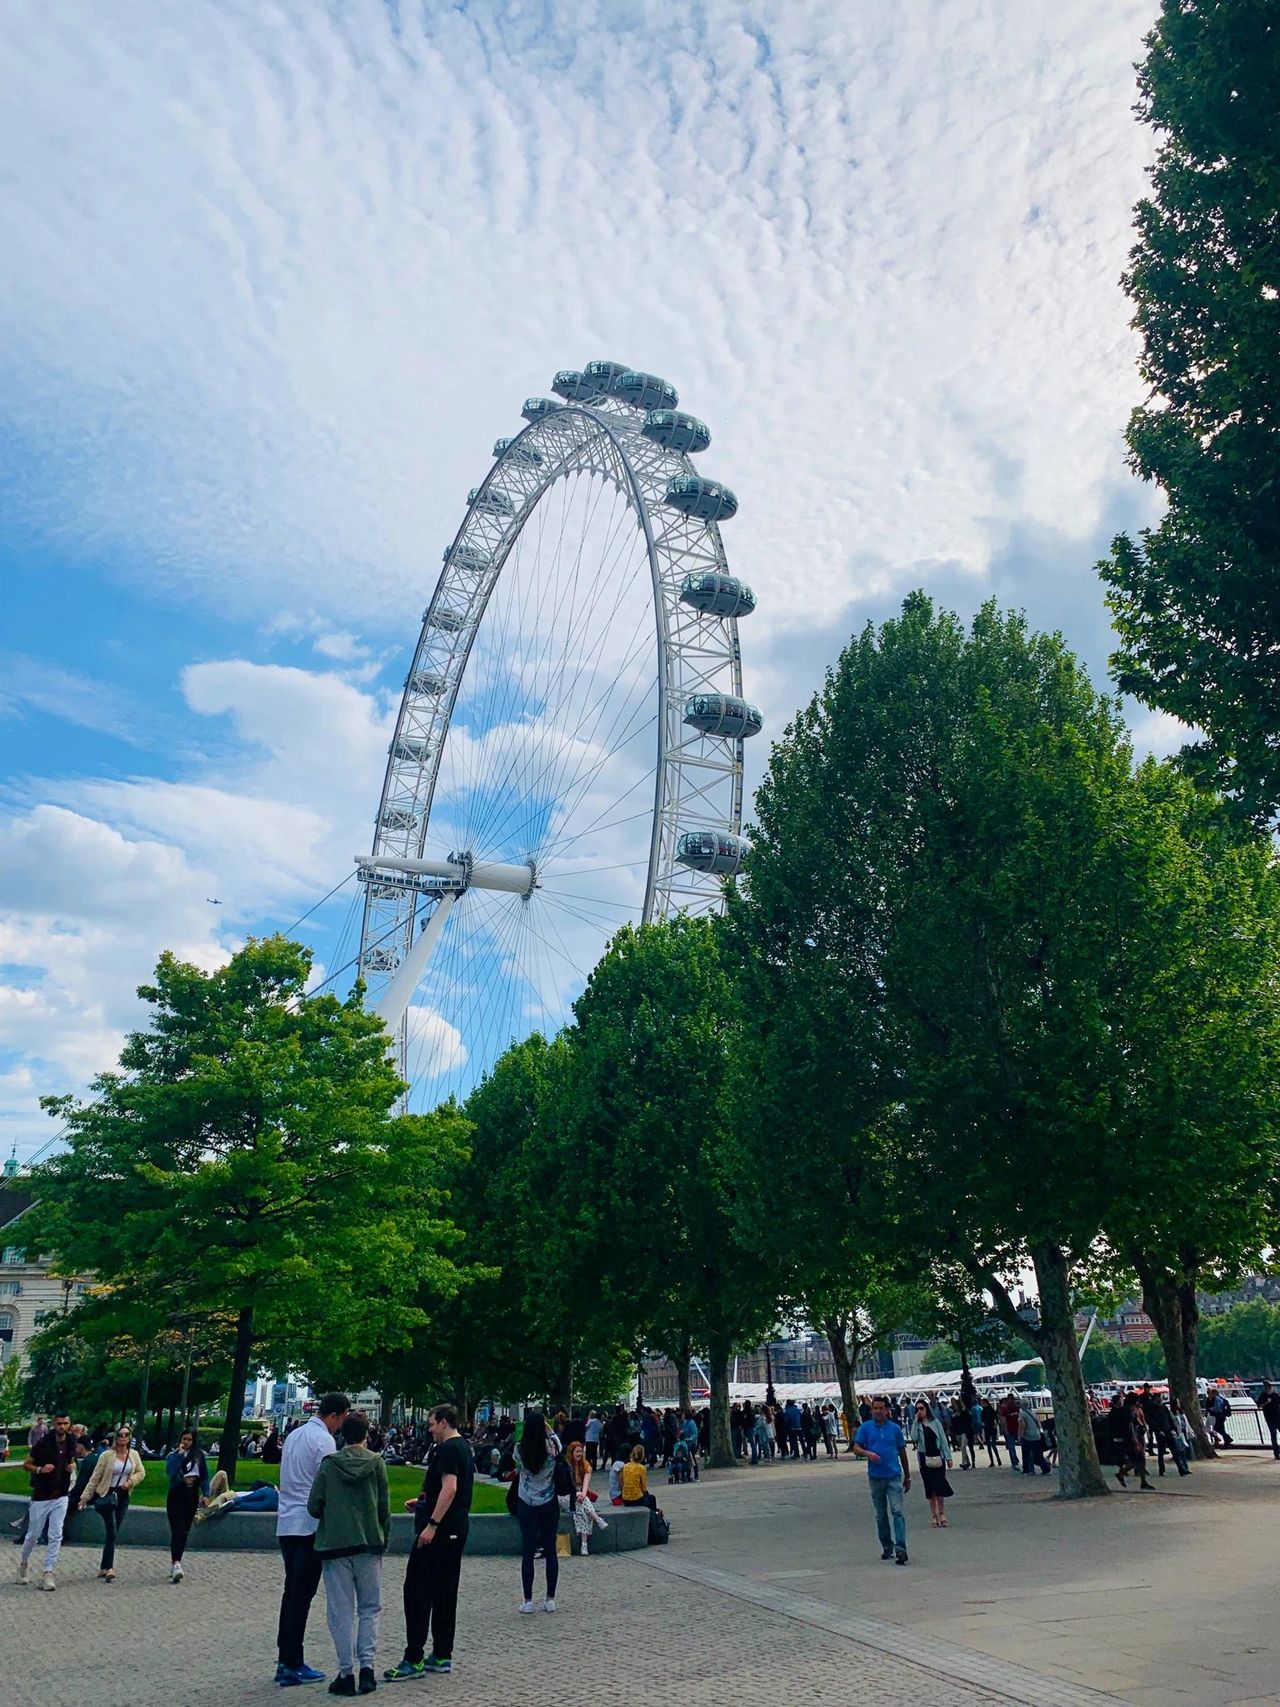 Is the London Eye fast-track worth it and how to get it?